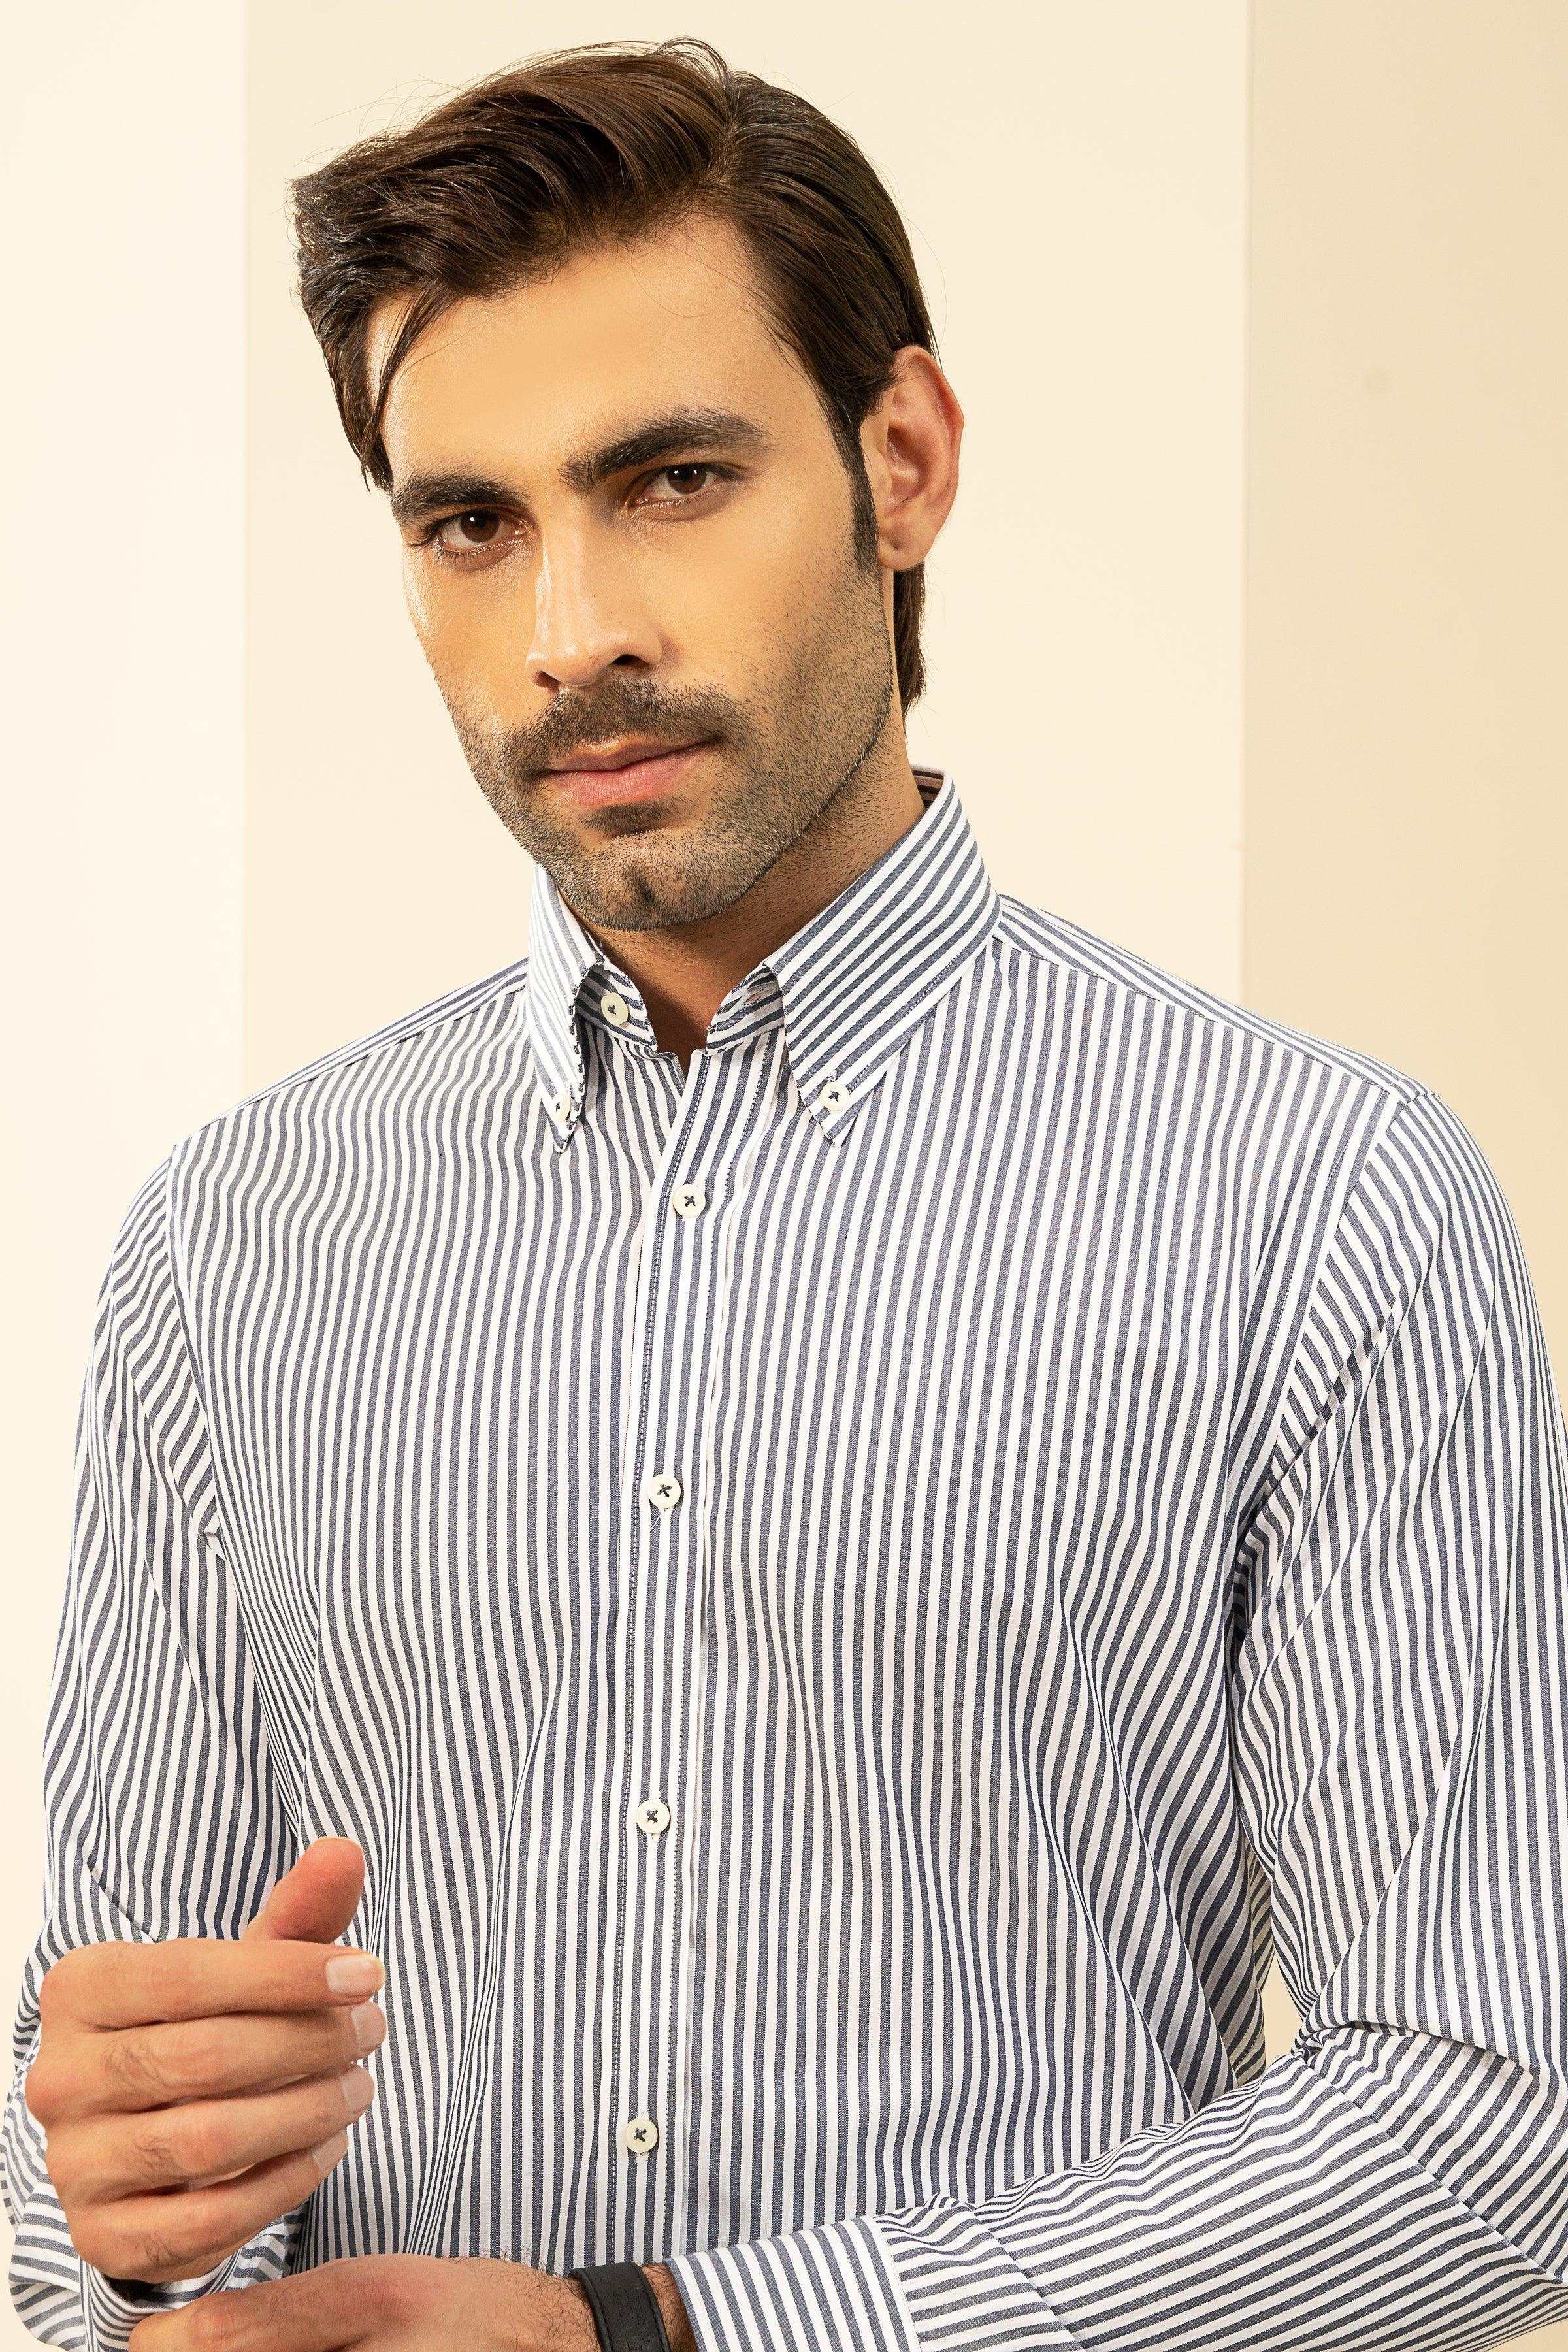 SEMI FORMAL BLUE WHITE LINE at Charcoal Clothing